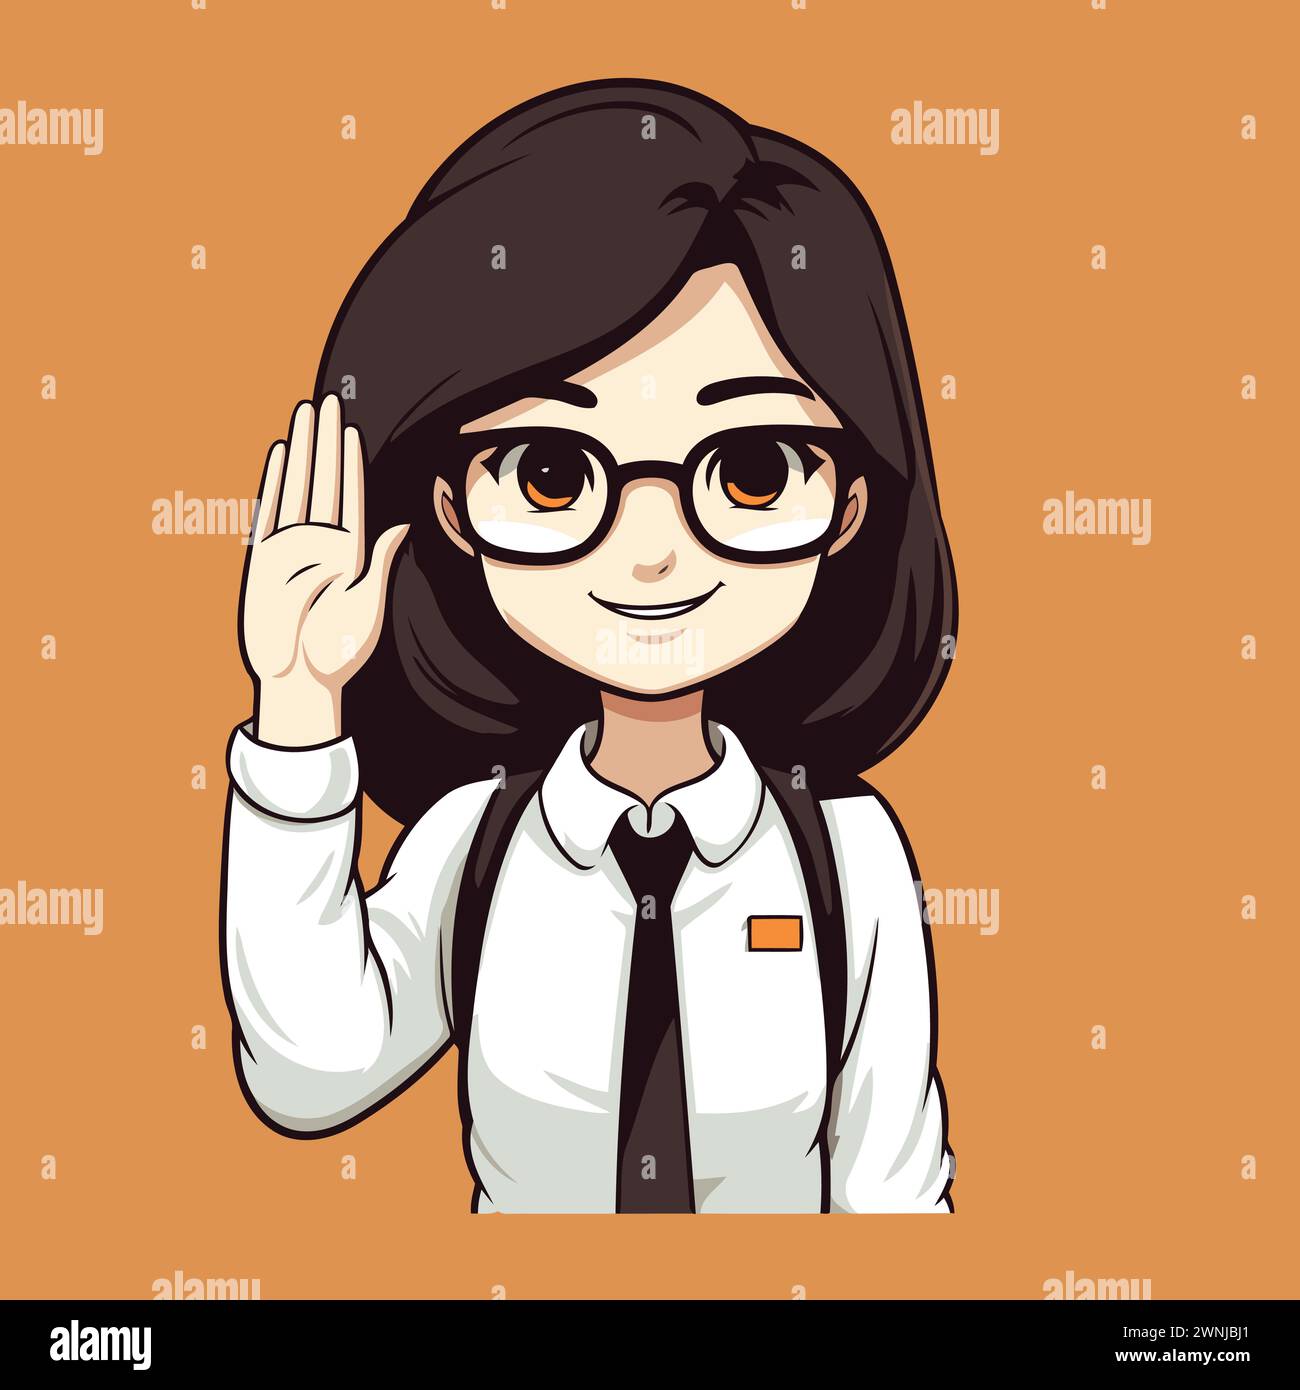 Cute asian schoolgirl with glasses saying hello. Vector illustration. Stock Vector